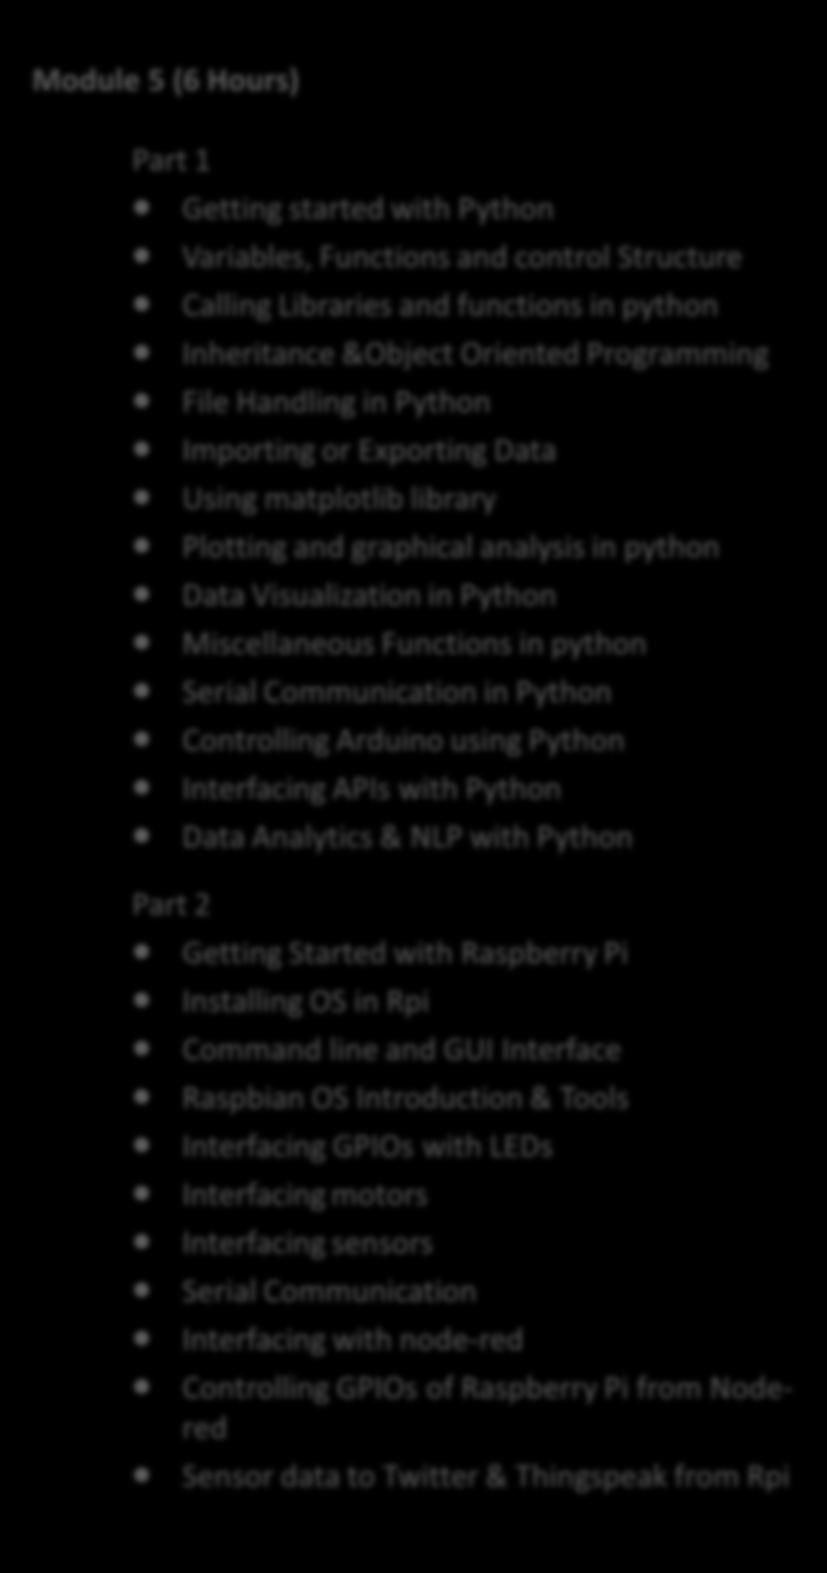 Module 5 (6 Hours) Getting started with Python Variables, Functions and control Structure Calling Libraries and functions in python Inheritance &Object Oriented Programming File Handling in Python